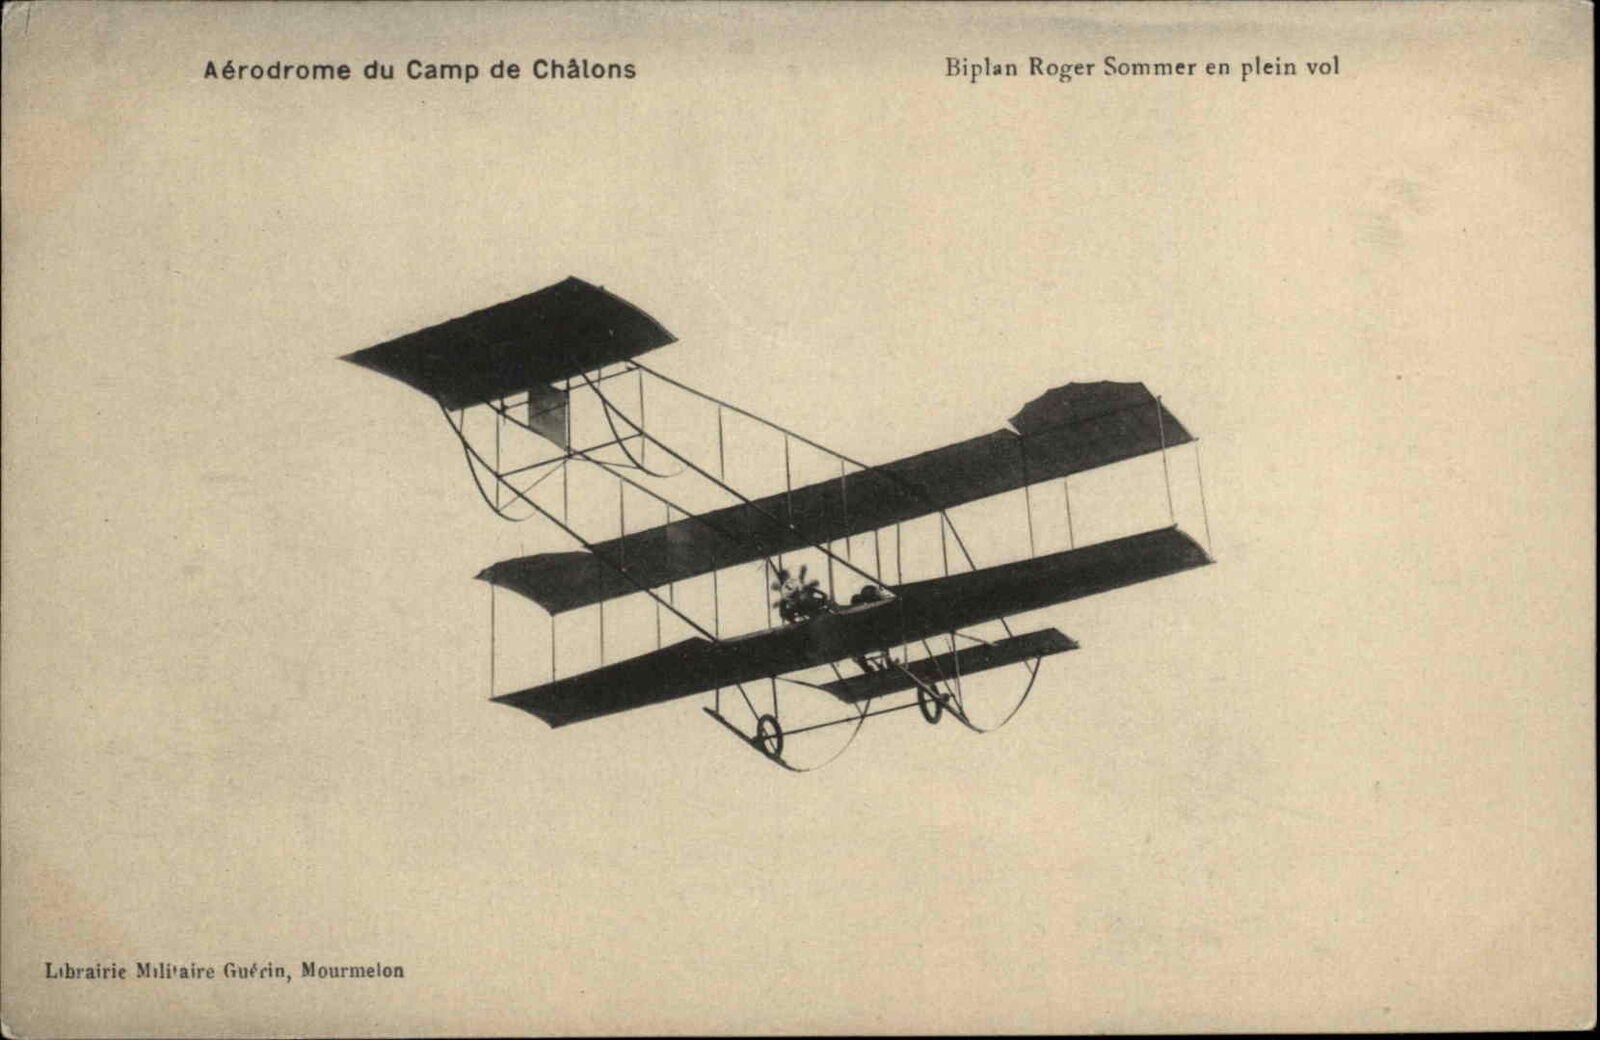 French Aviator Pilot Roger Sommer Camp de Chalons France Biplane c1910 PC